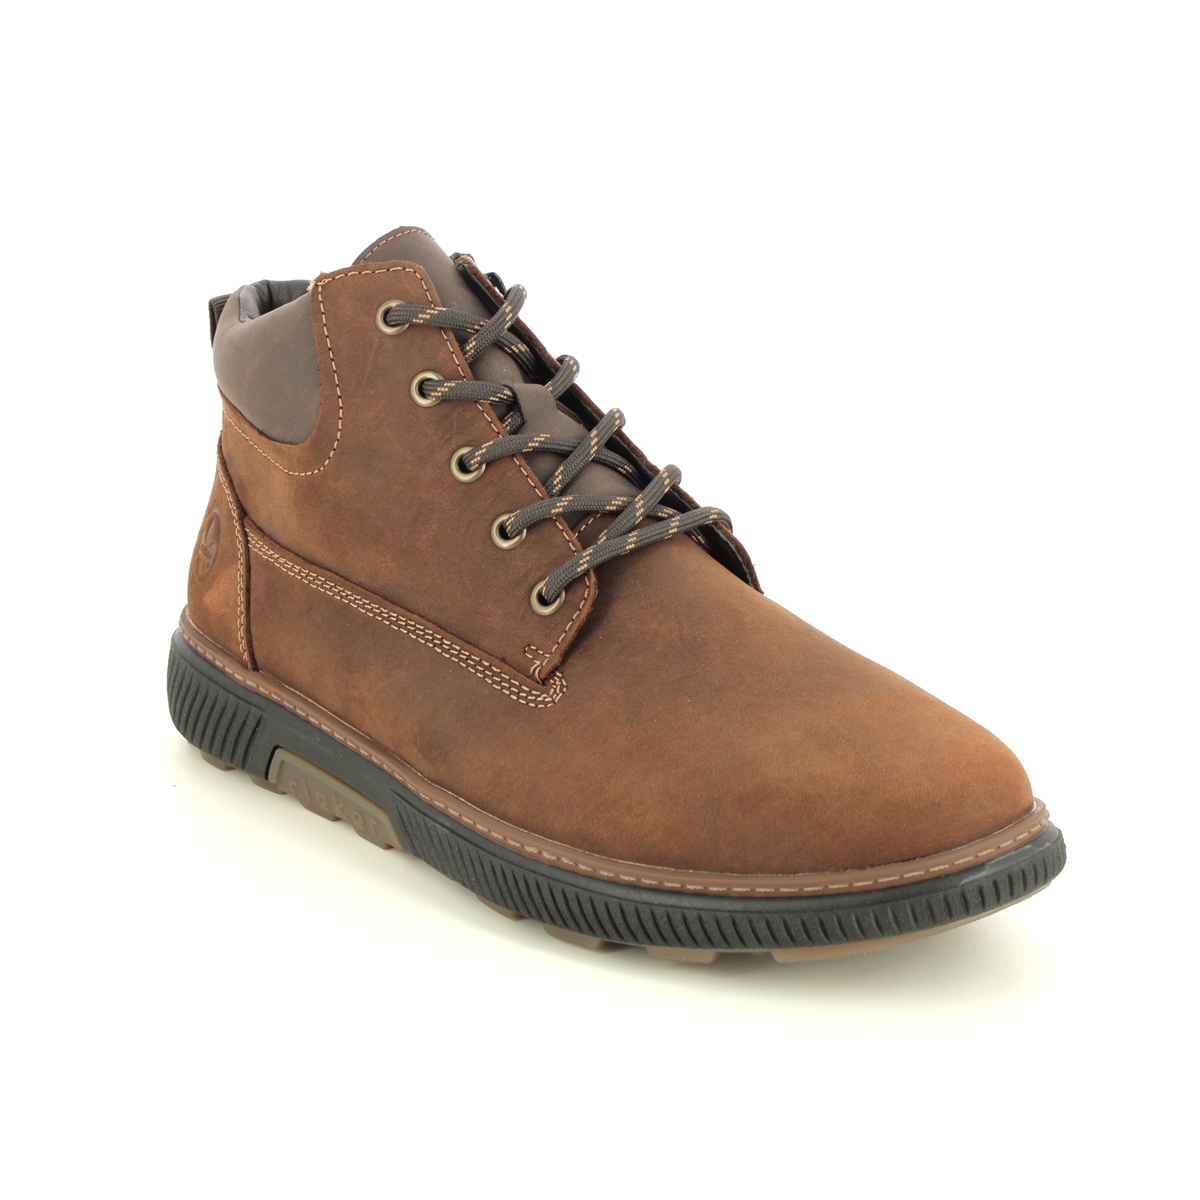 Rieker B3312-22 Brown Suede Mens Chukka Boots in a Plain Leather in Size 46